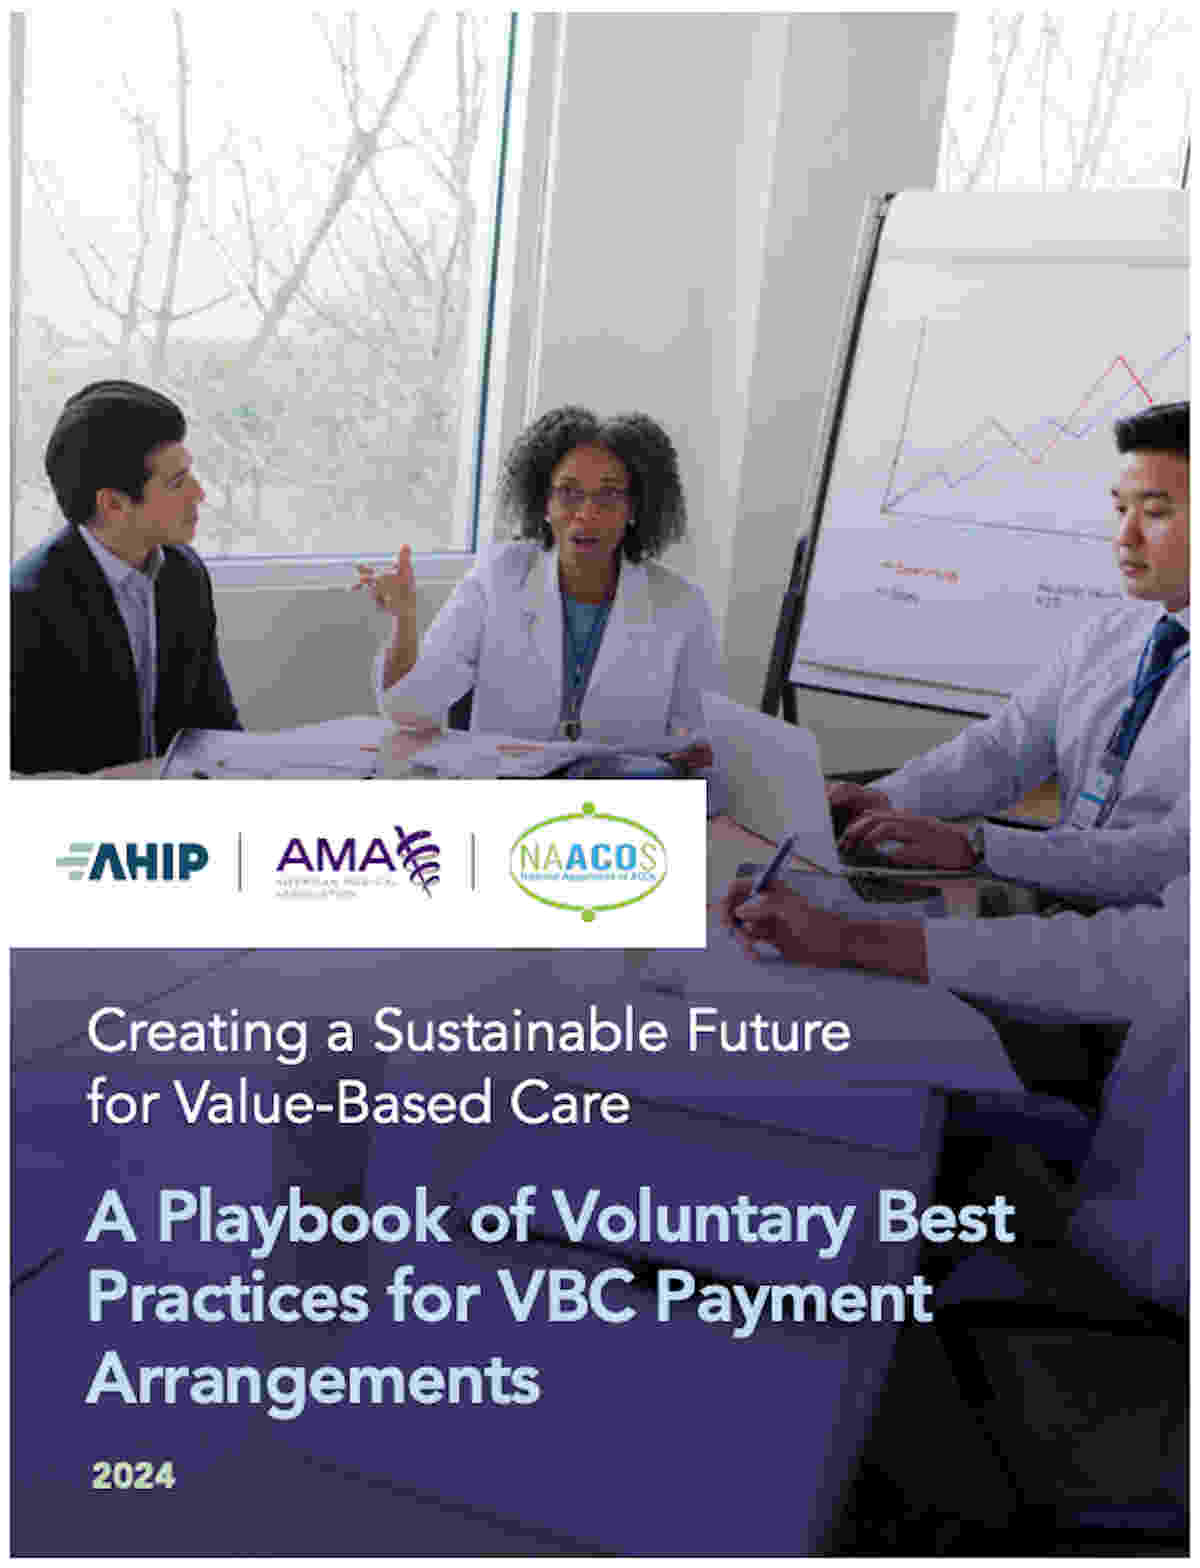 Health care organizations collaborate on best practices for value-based care